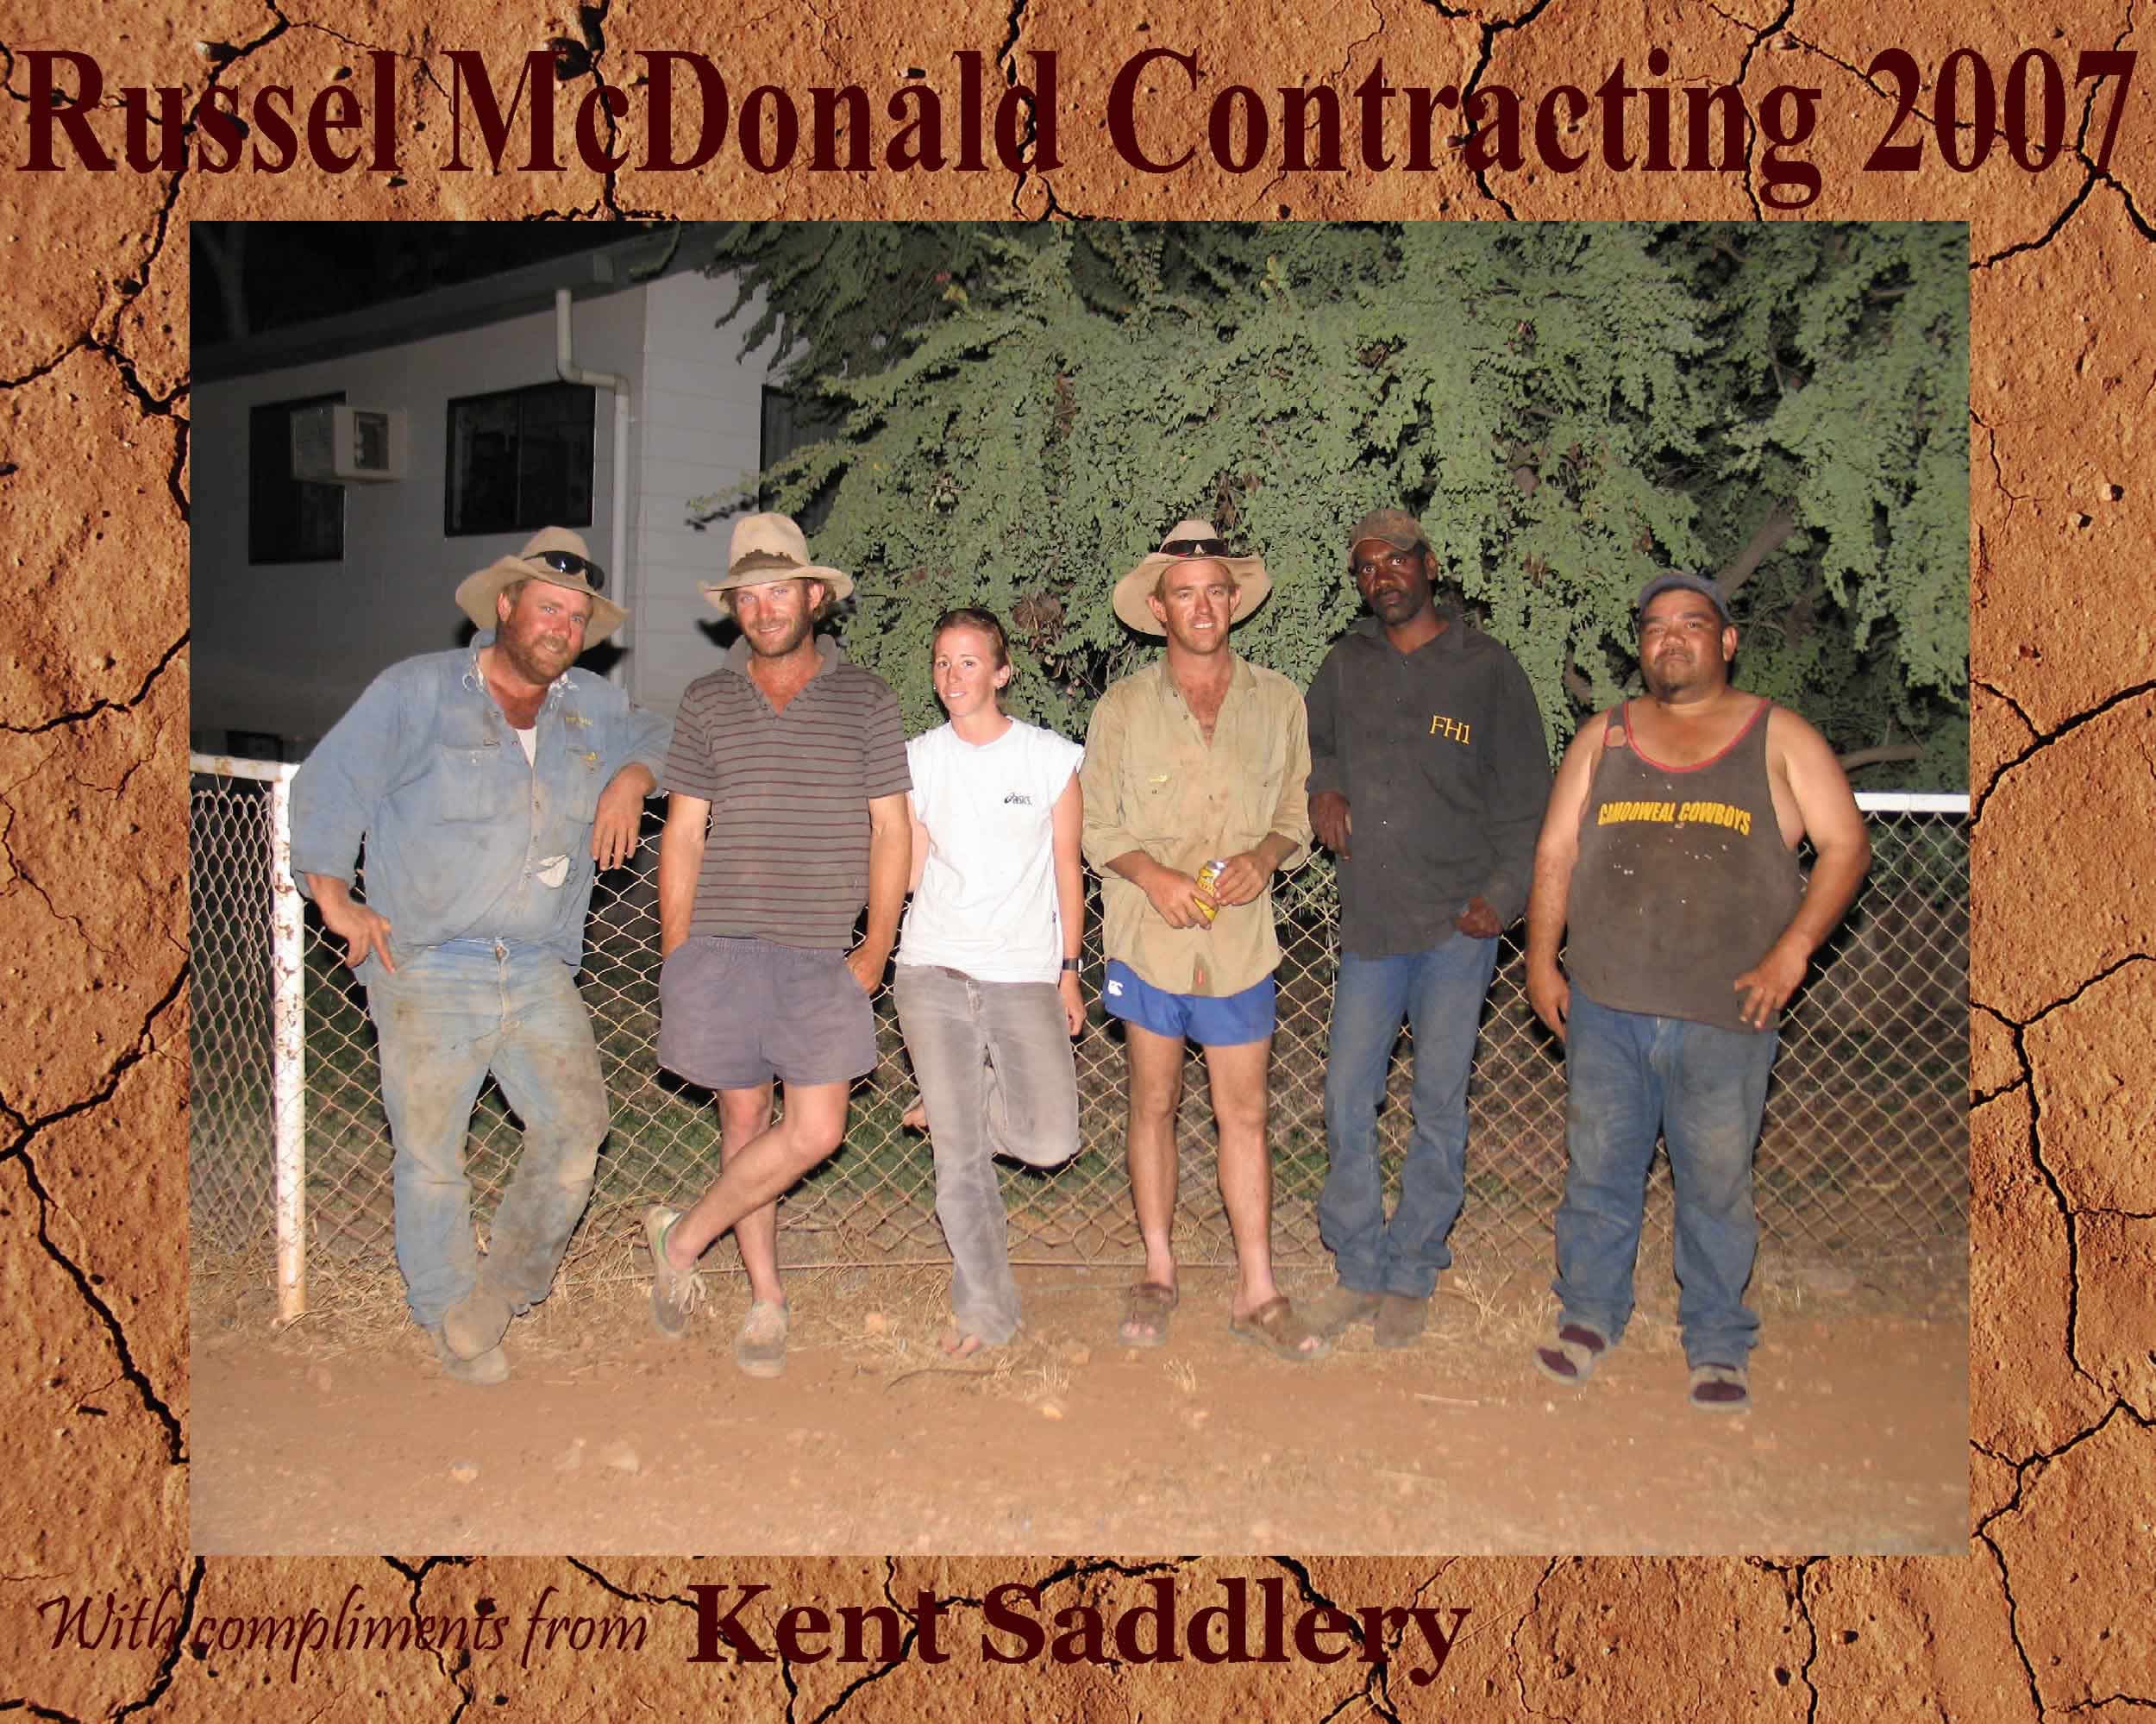 Drovers & Contractors - Russell McDonald Contracting 4